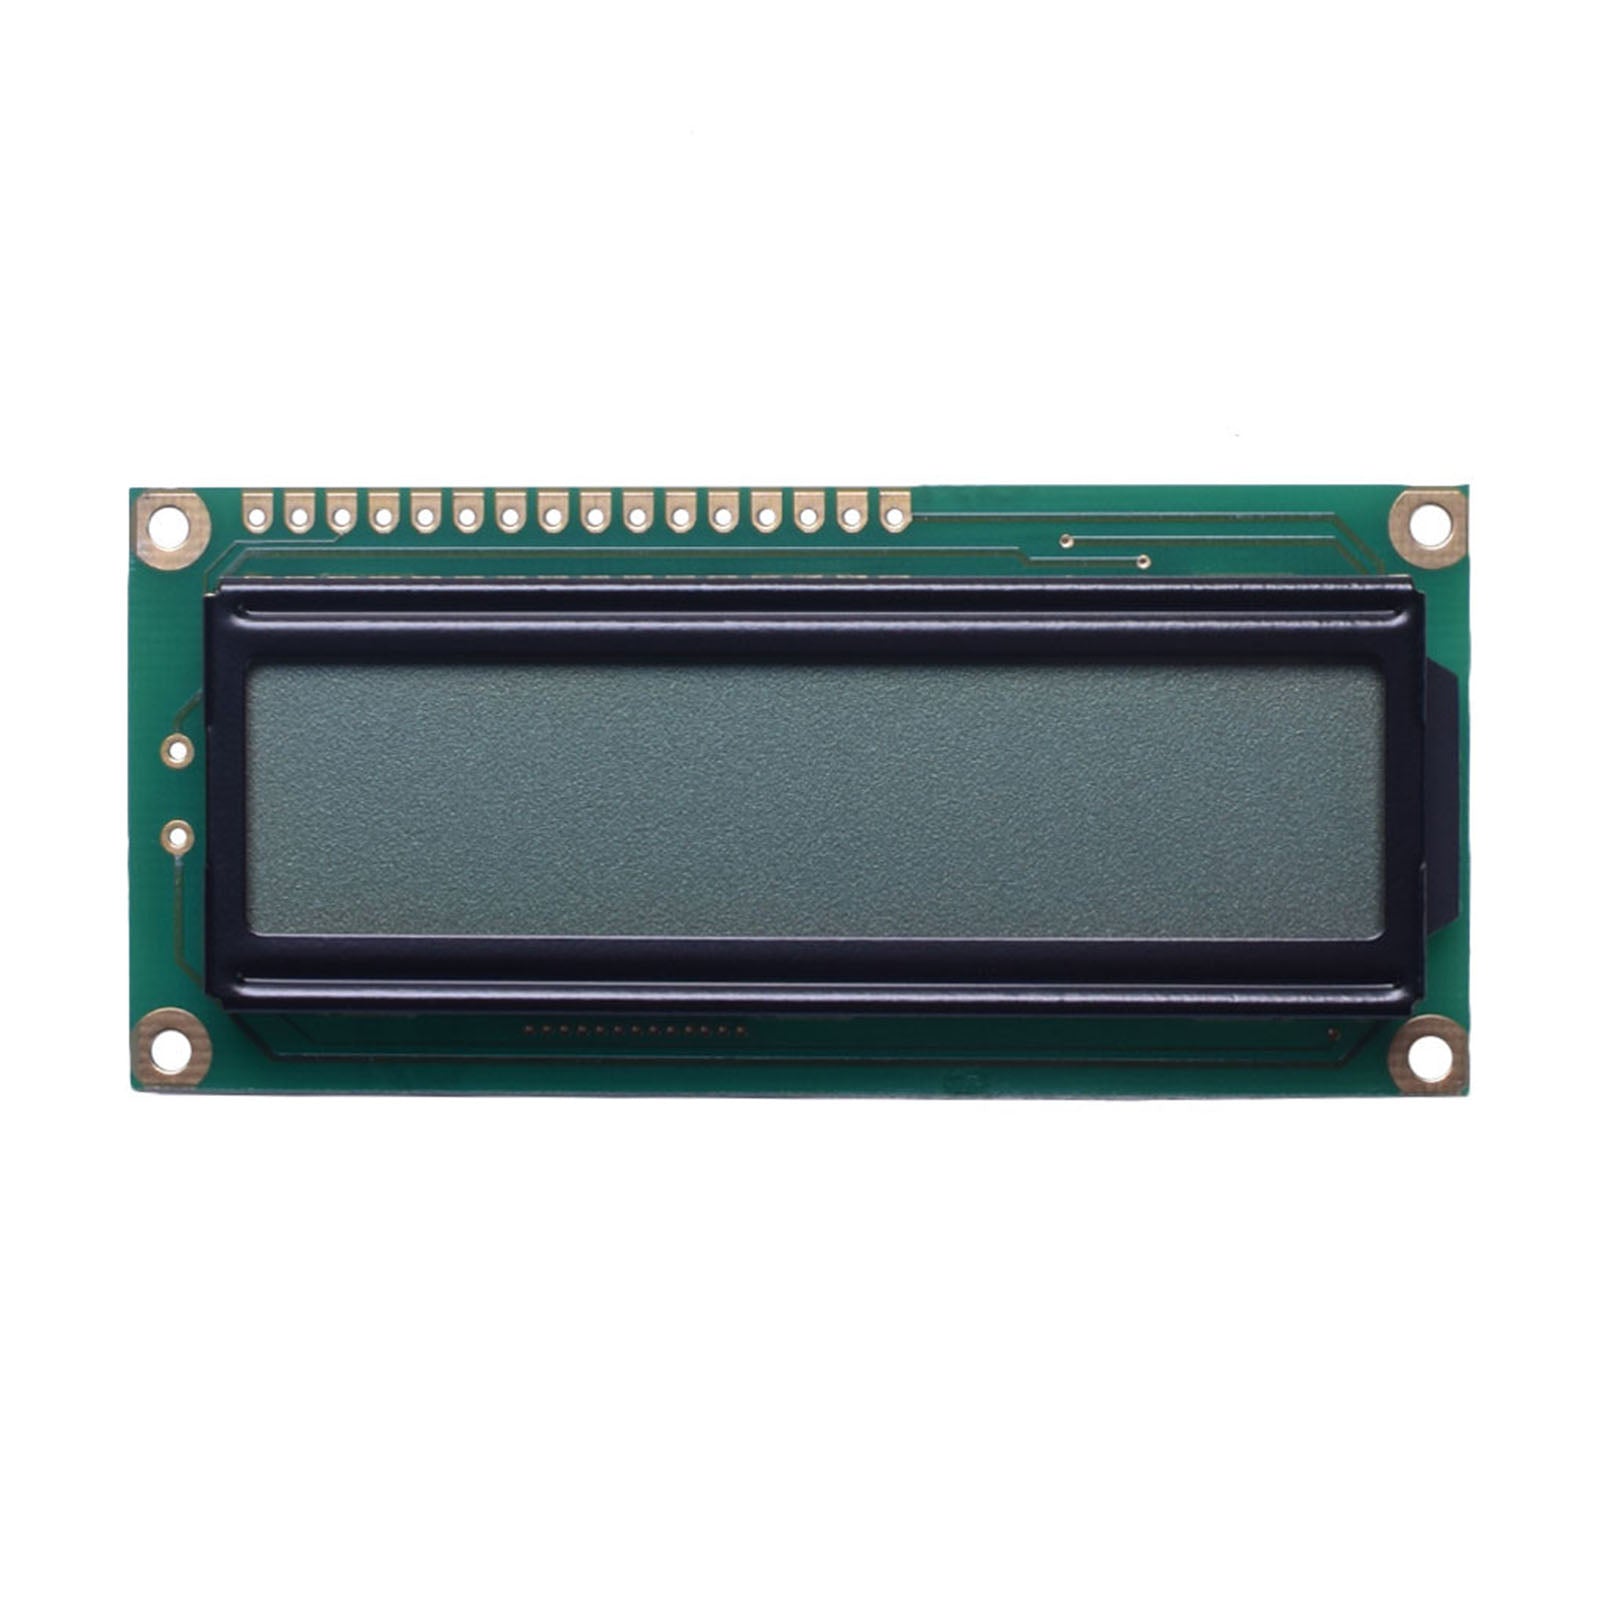 16x2 character LCD with FSTN transflective technology, Japanese/European font, and MCU interface